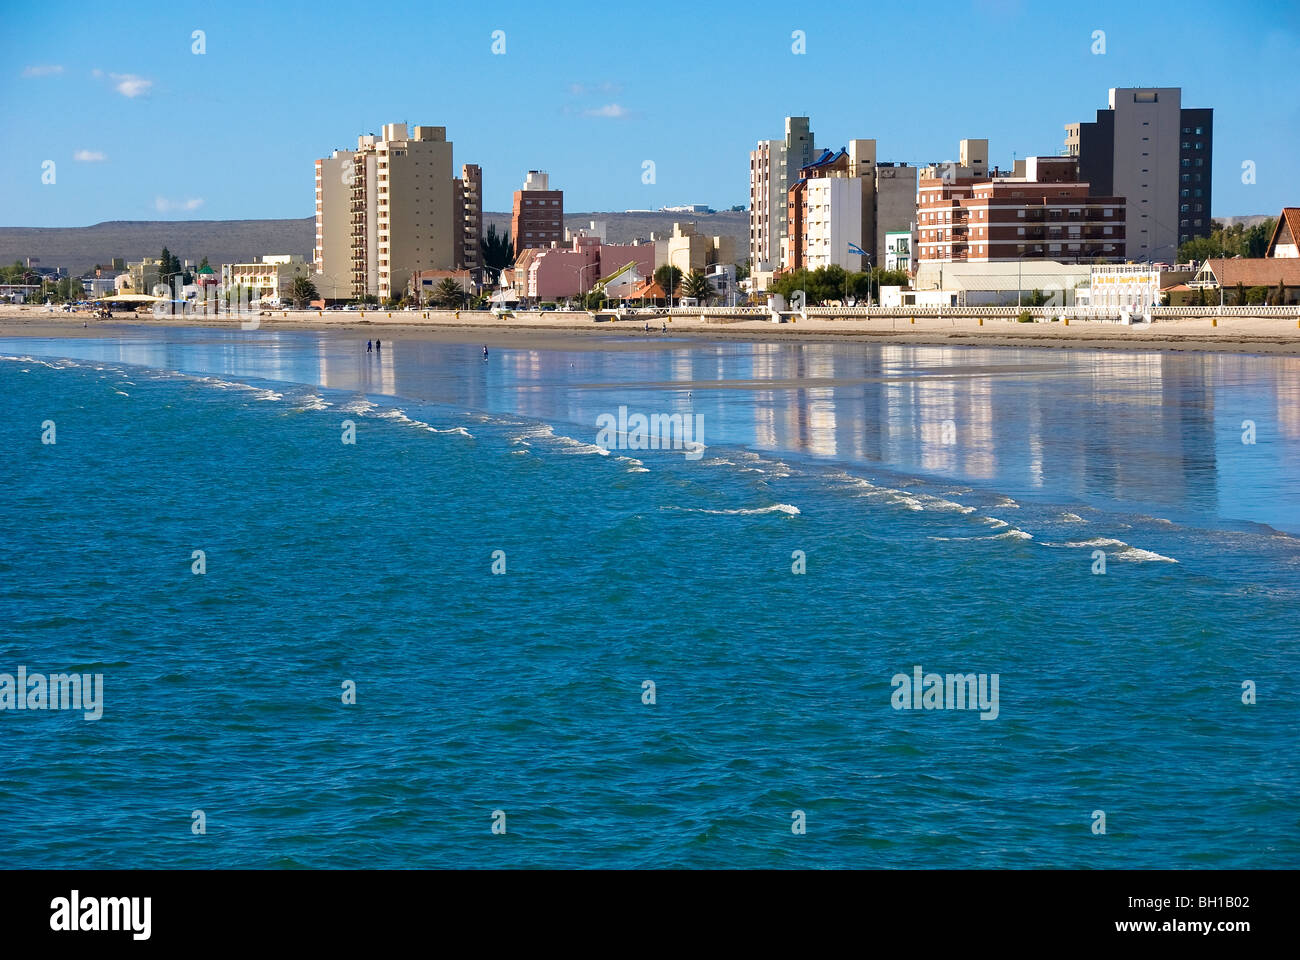 Argentina's second largest fishing port, Puerto Madryn on the Golfo Nuevo  in the Patagonia region of Argentina Stock Photo - Alamy